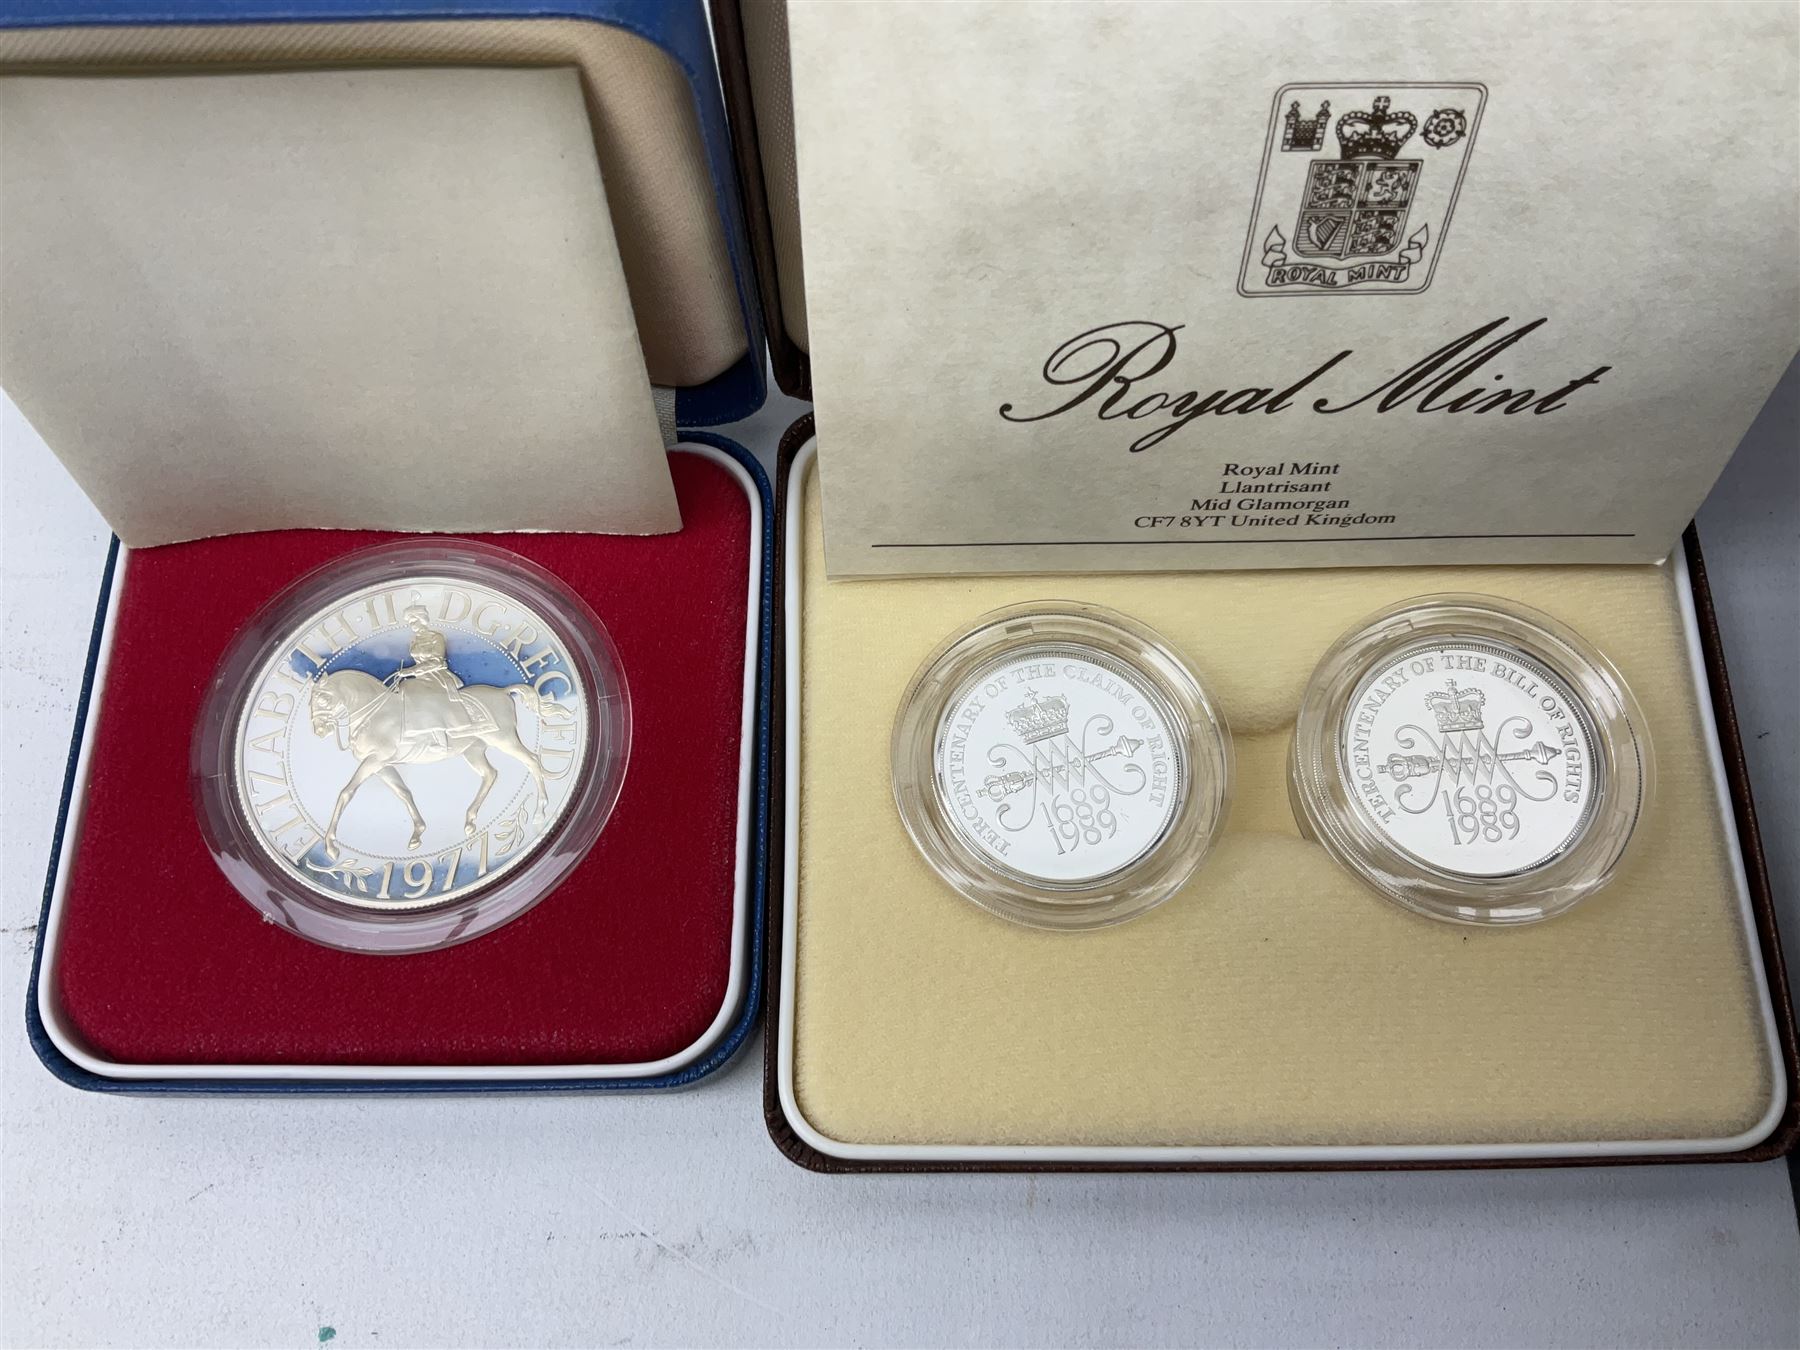 The Royal Mint United Kingdom silver proof coins - Image 7 of 7